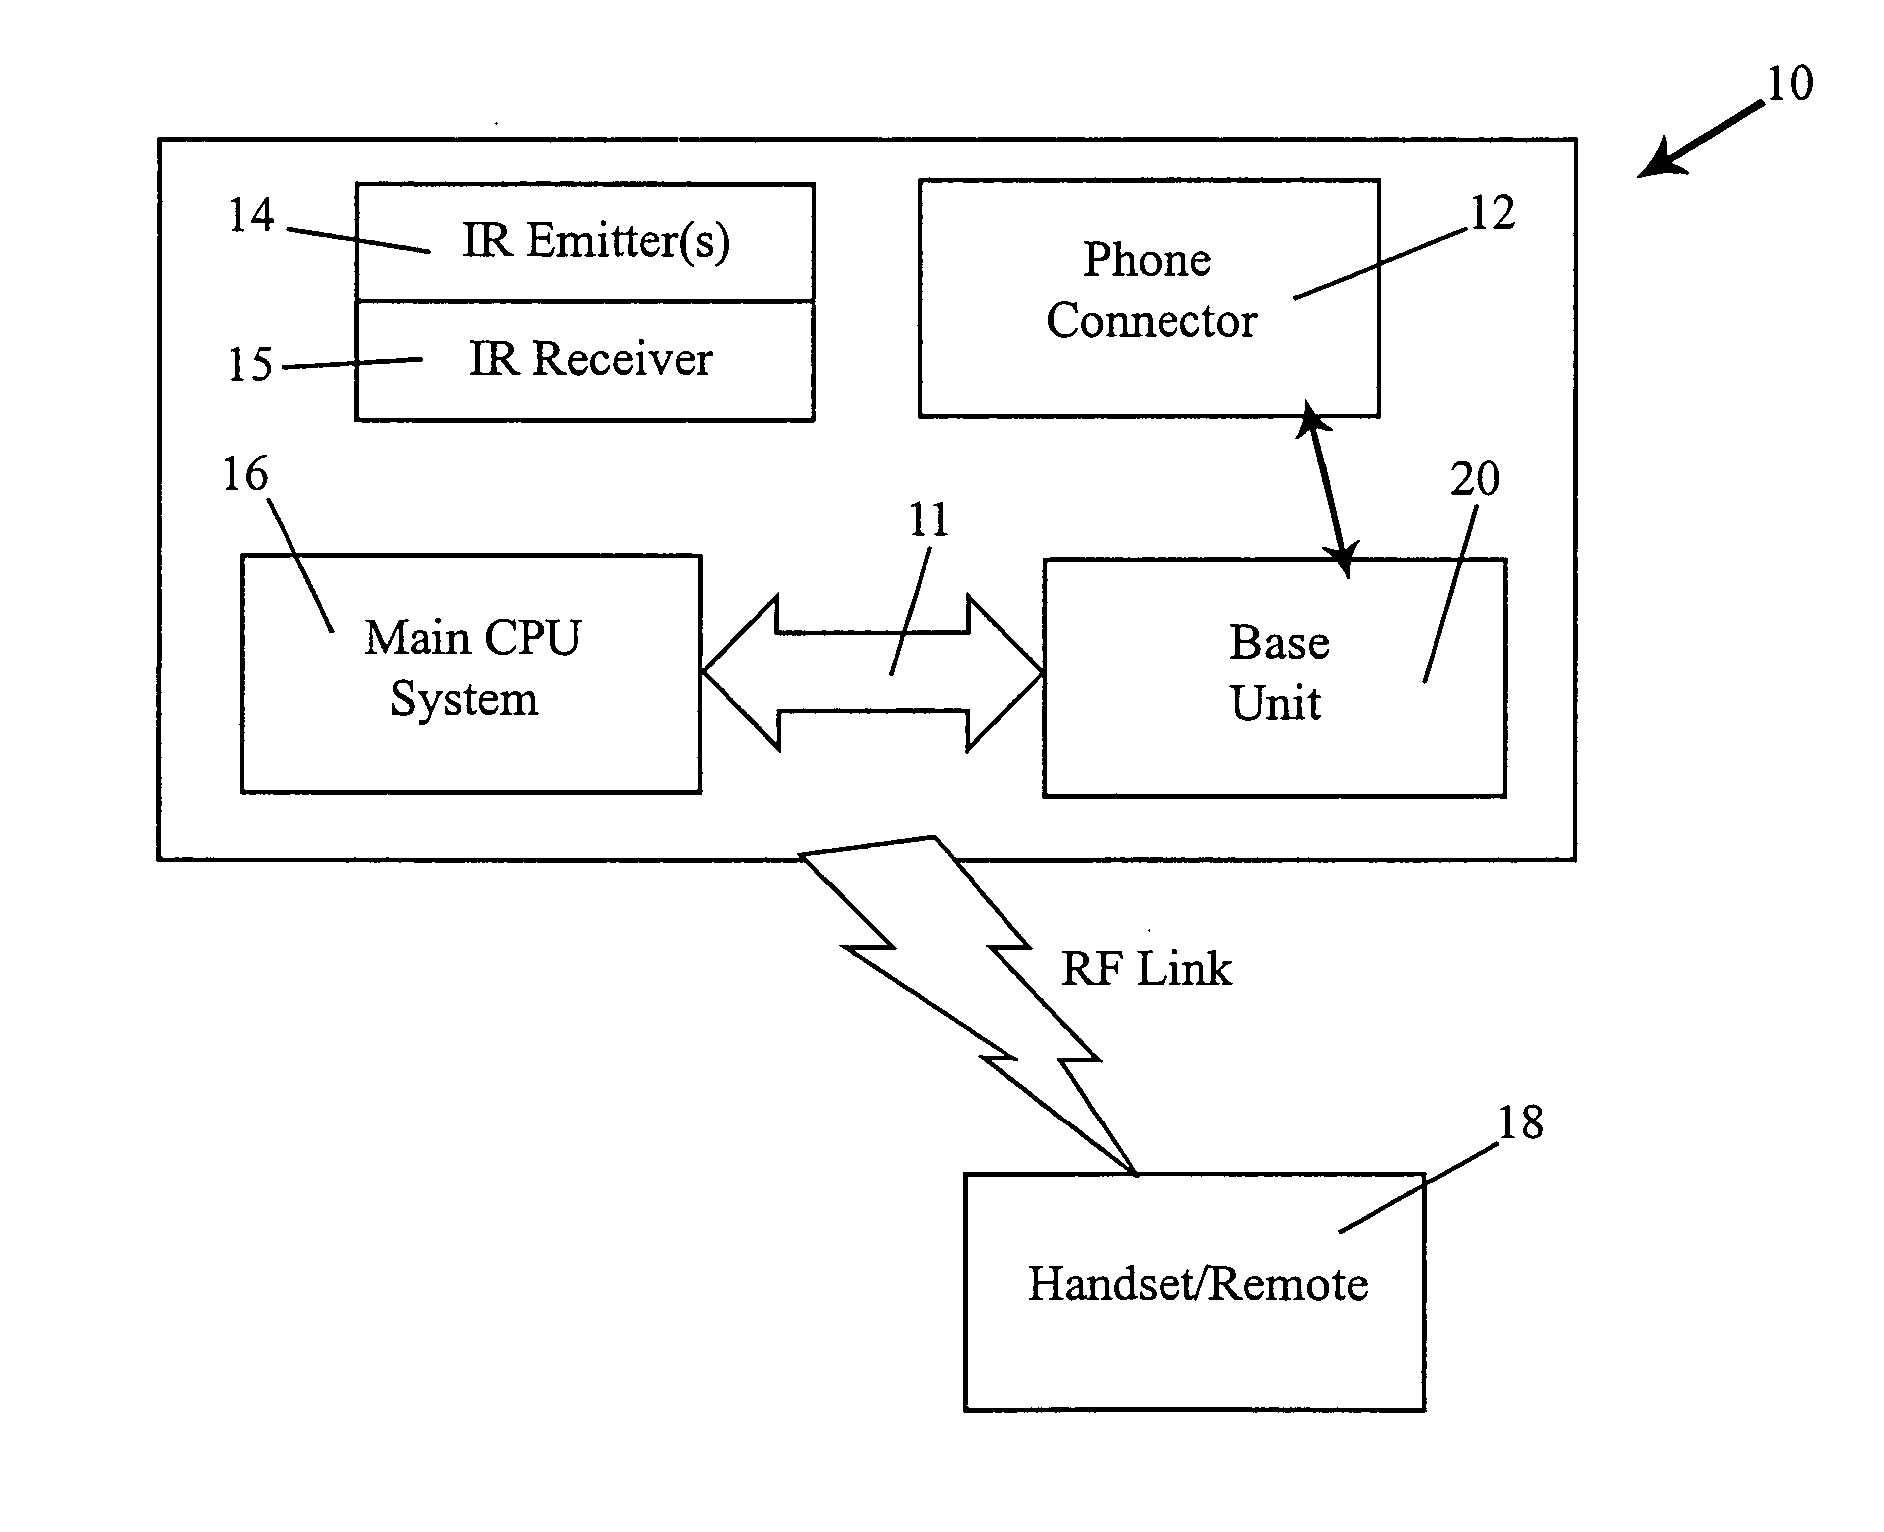 Radio frequency remote control apparatus and methodology